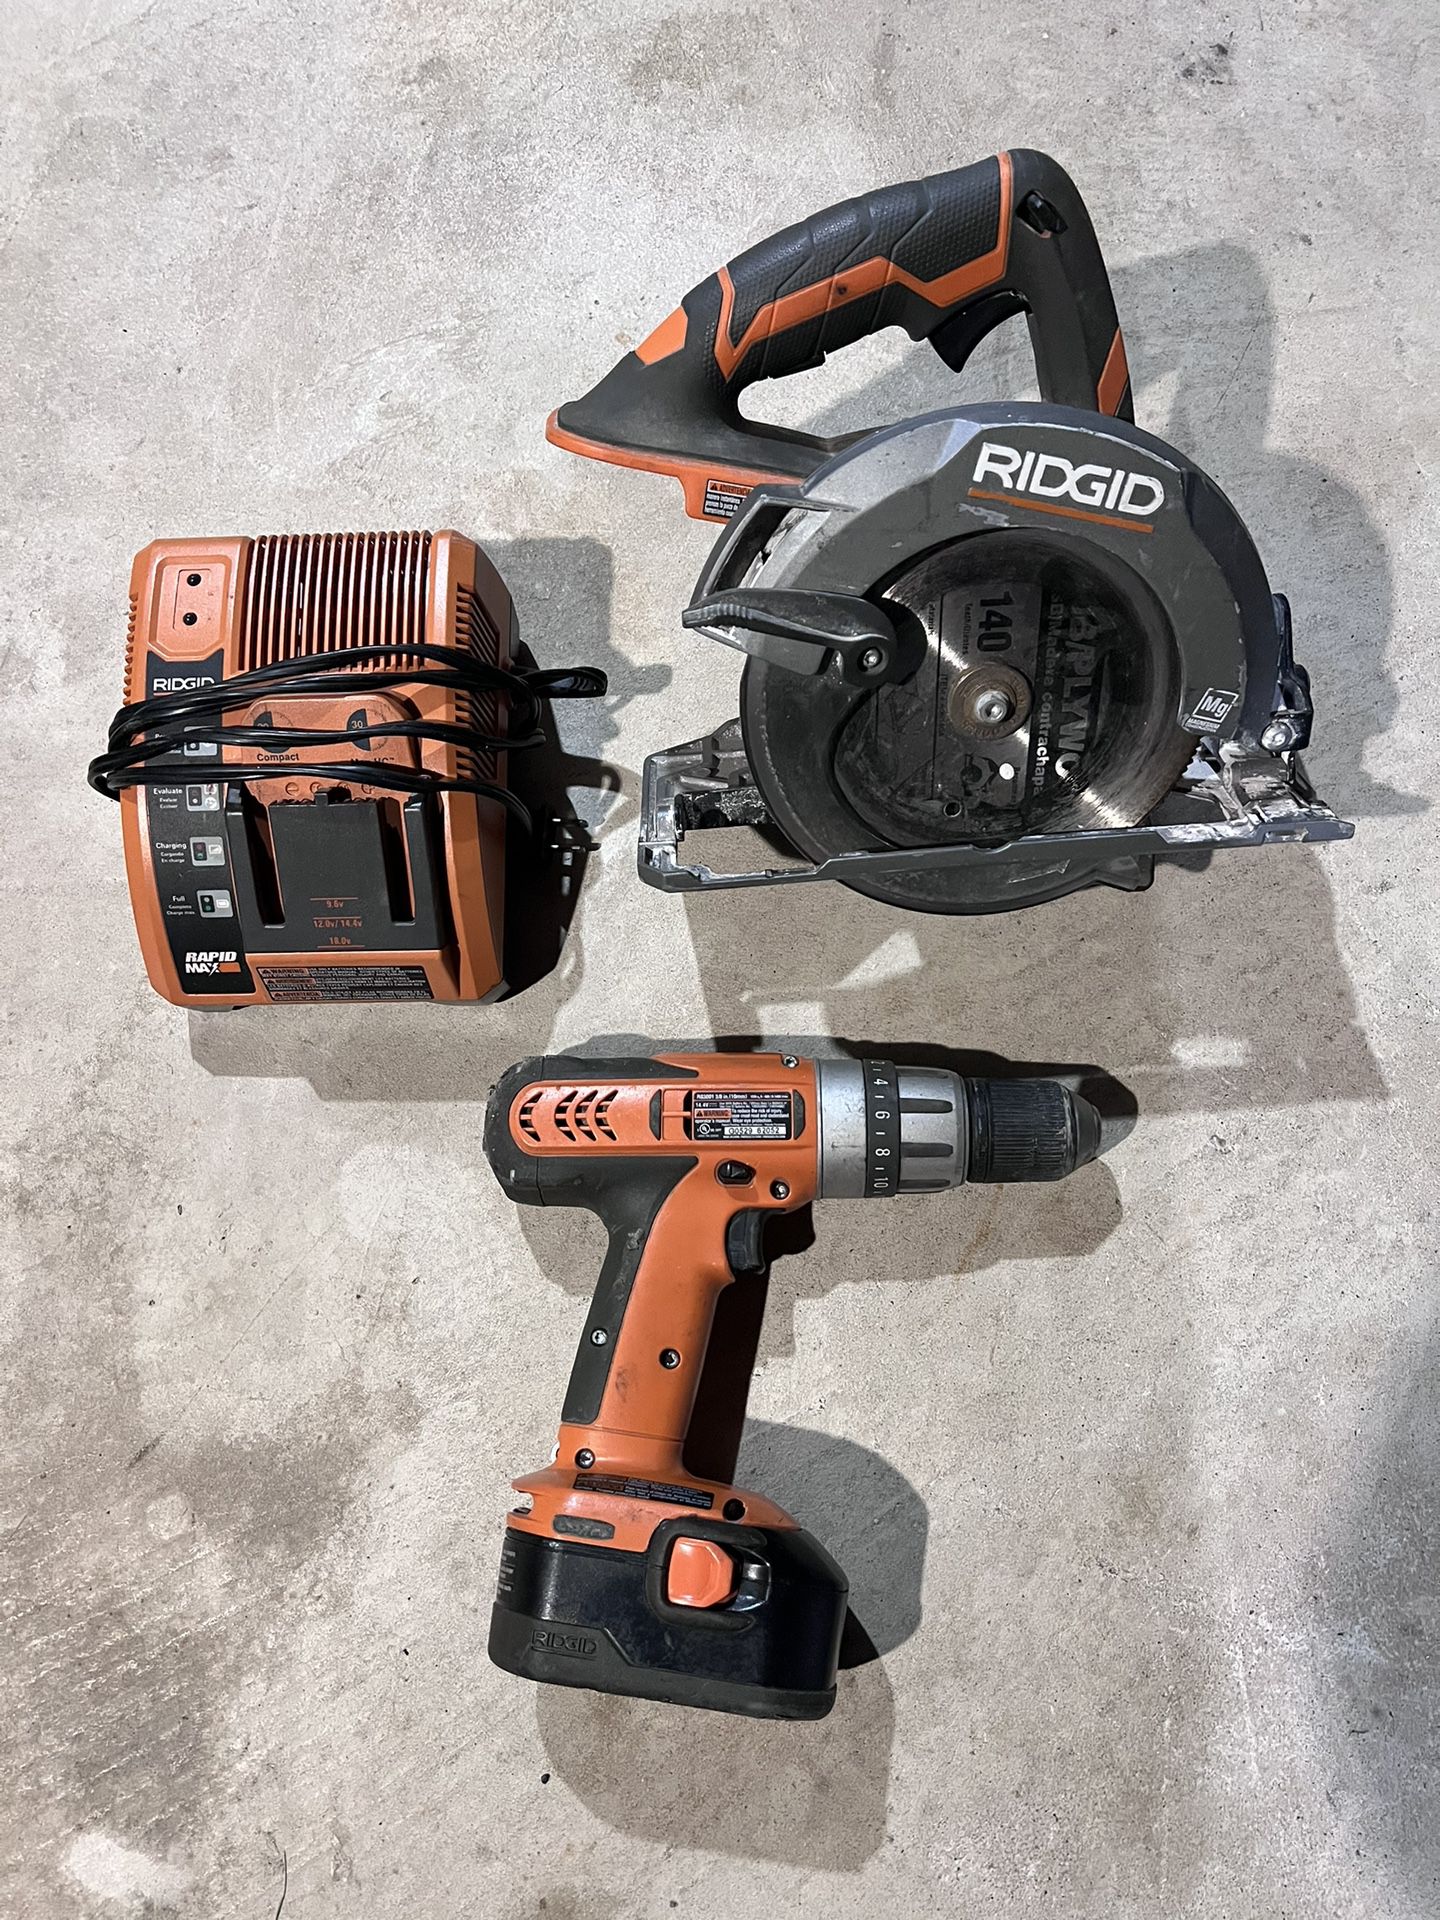 SELLING RIGID - DRILL, CIRCULAR SAW, BATTERY CHARGER, BATTERY 